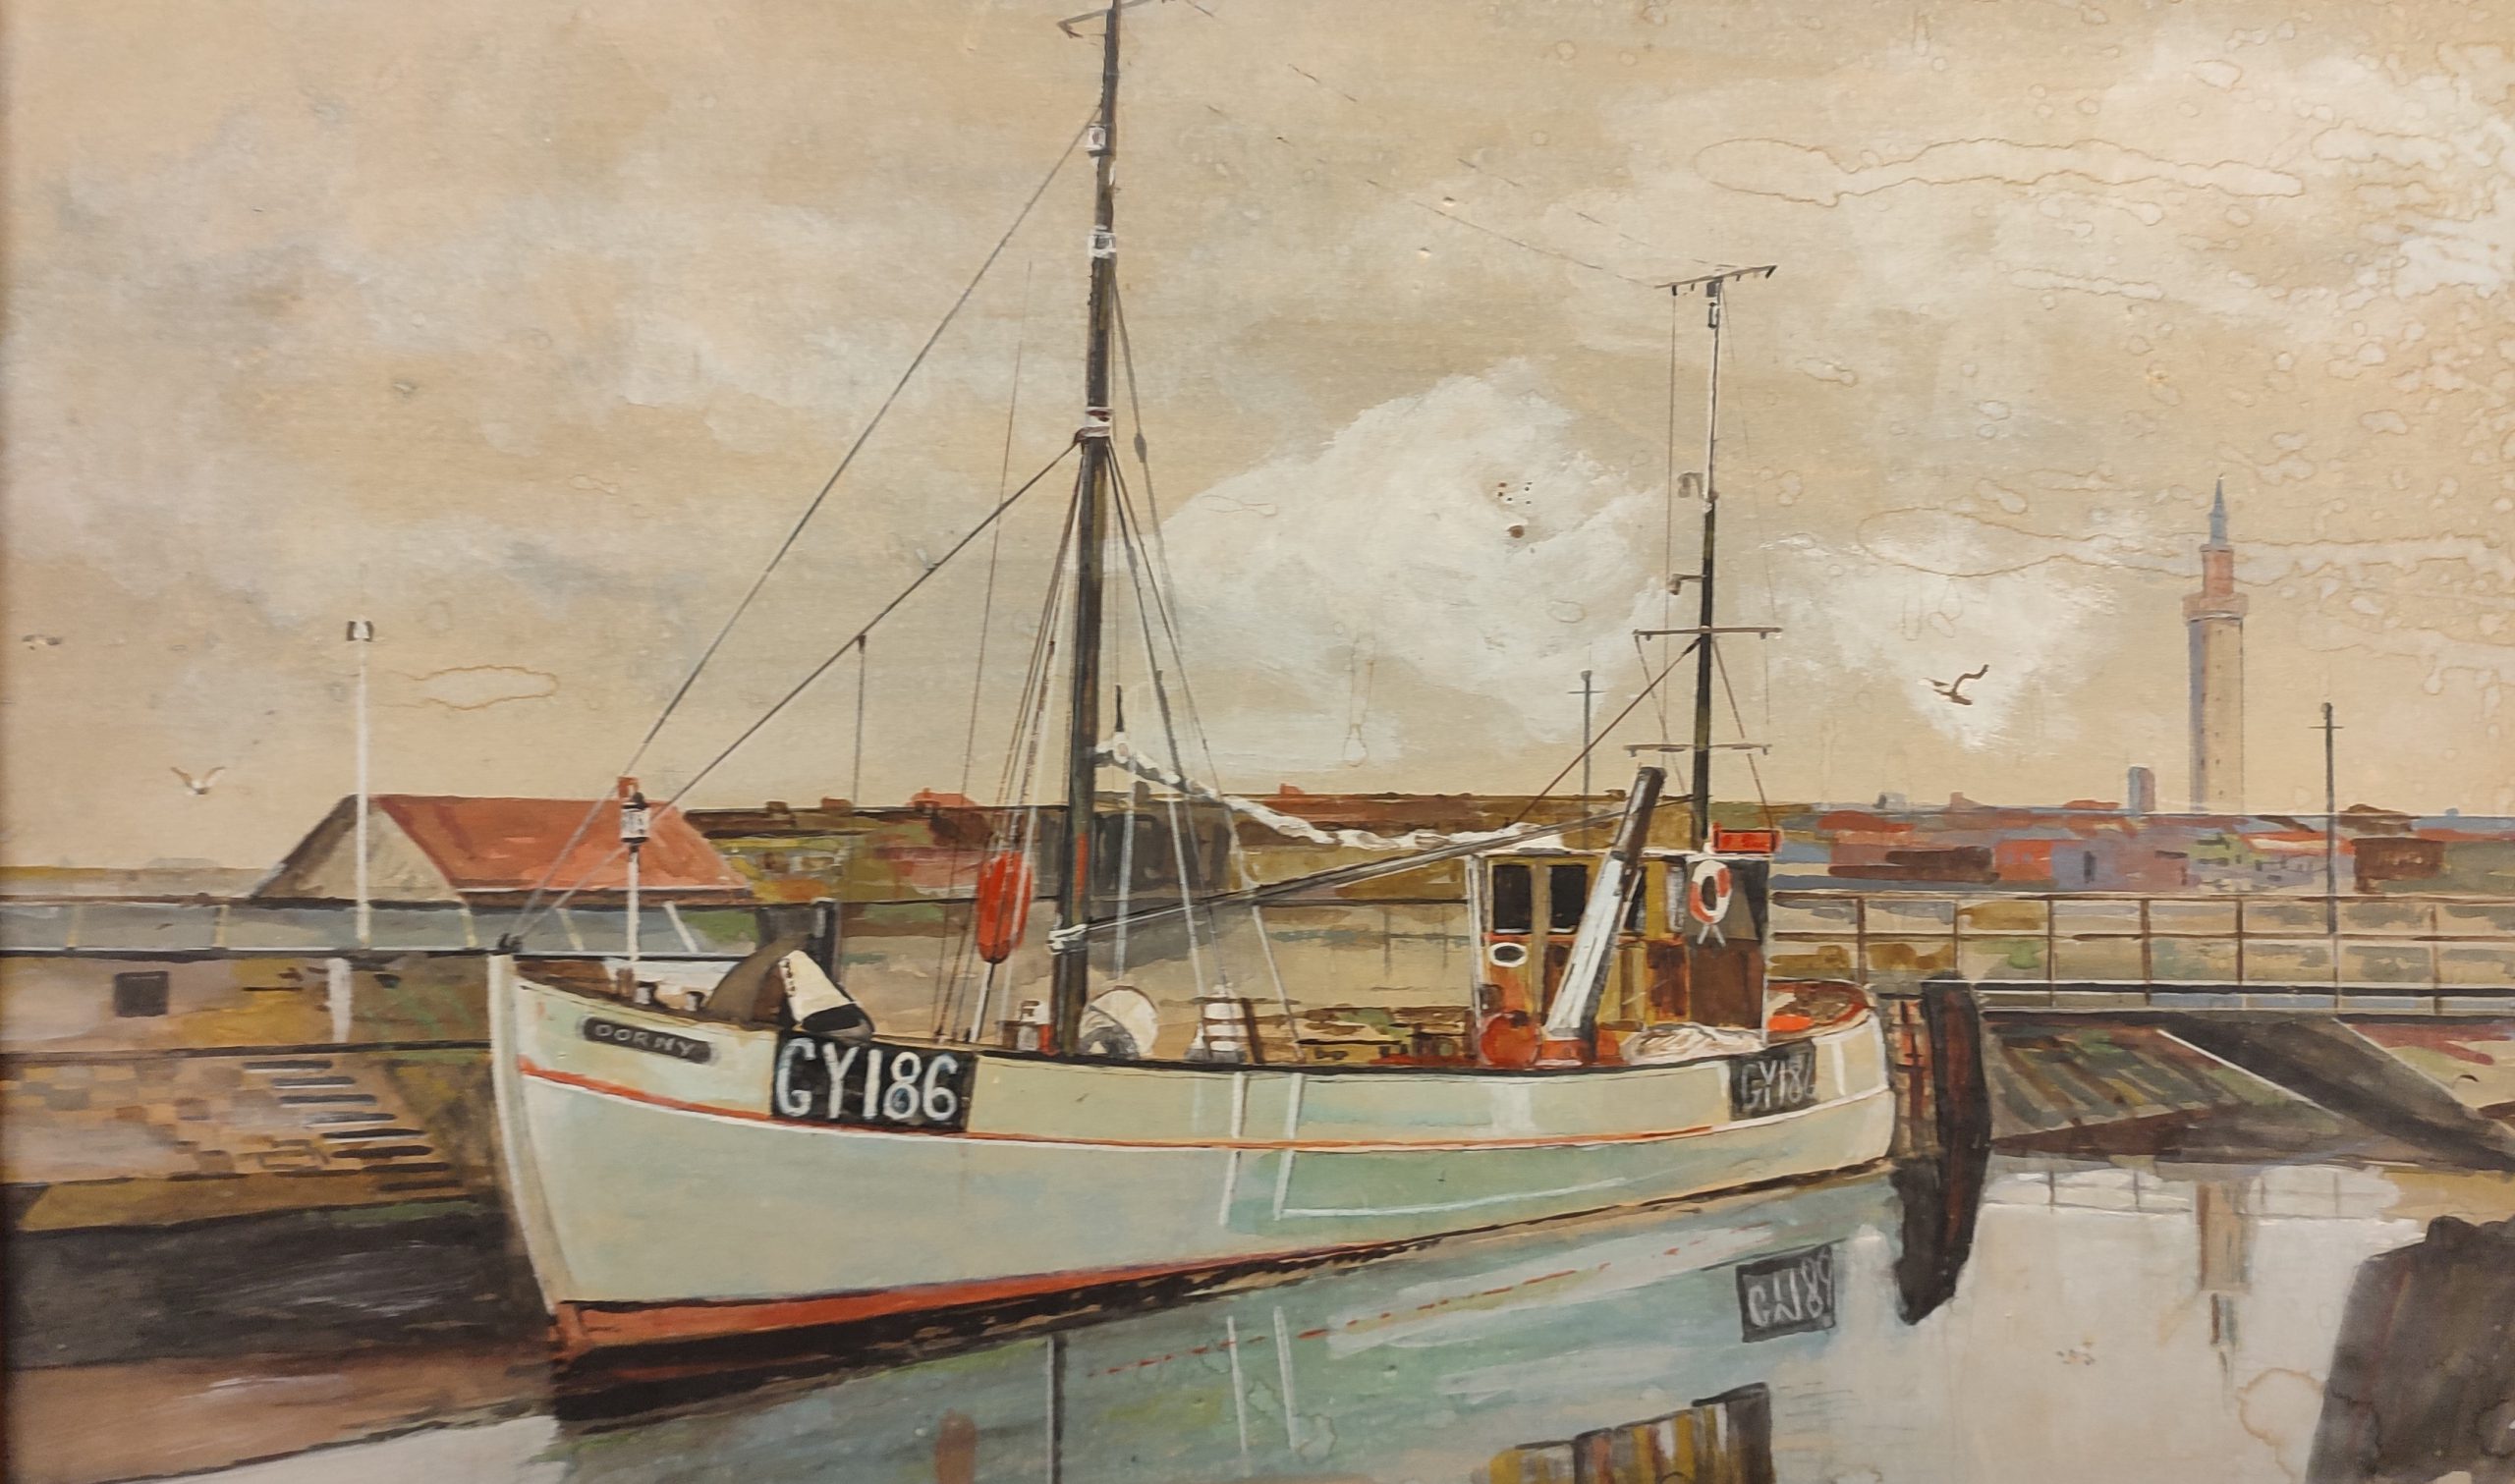 A painting of the Dorny GY186